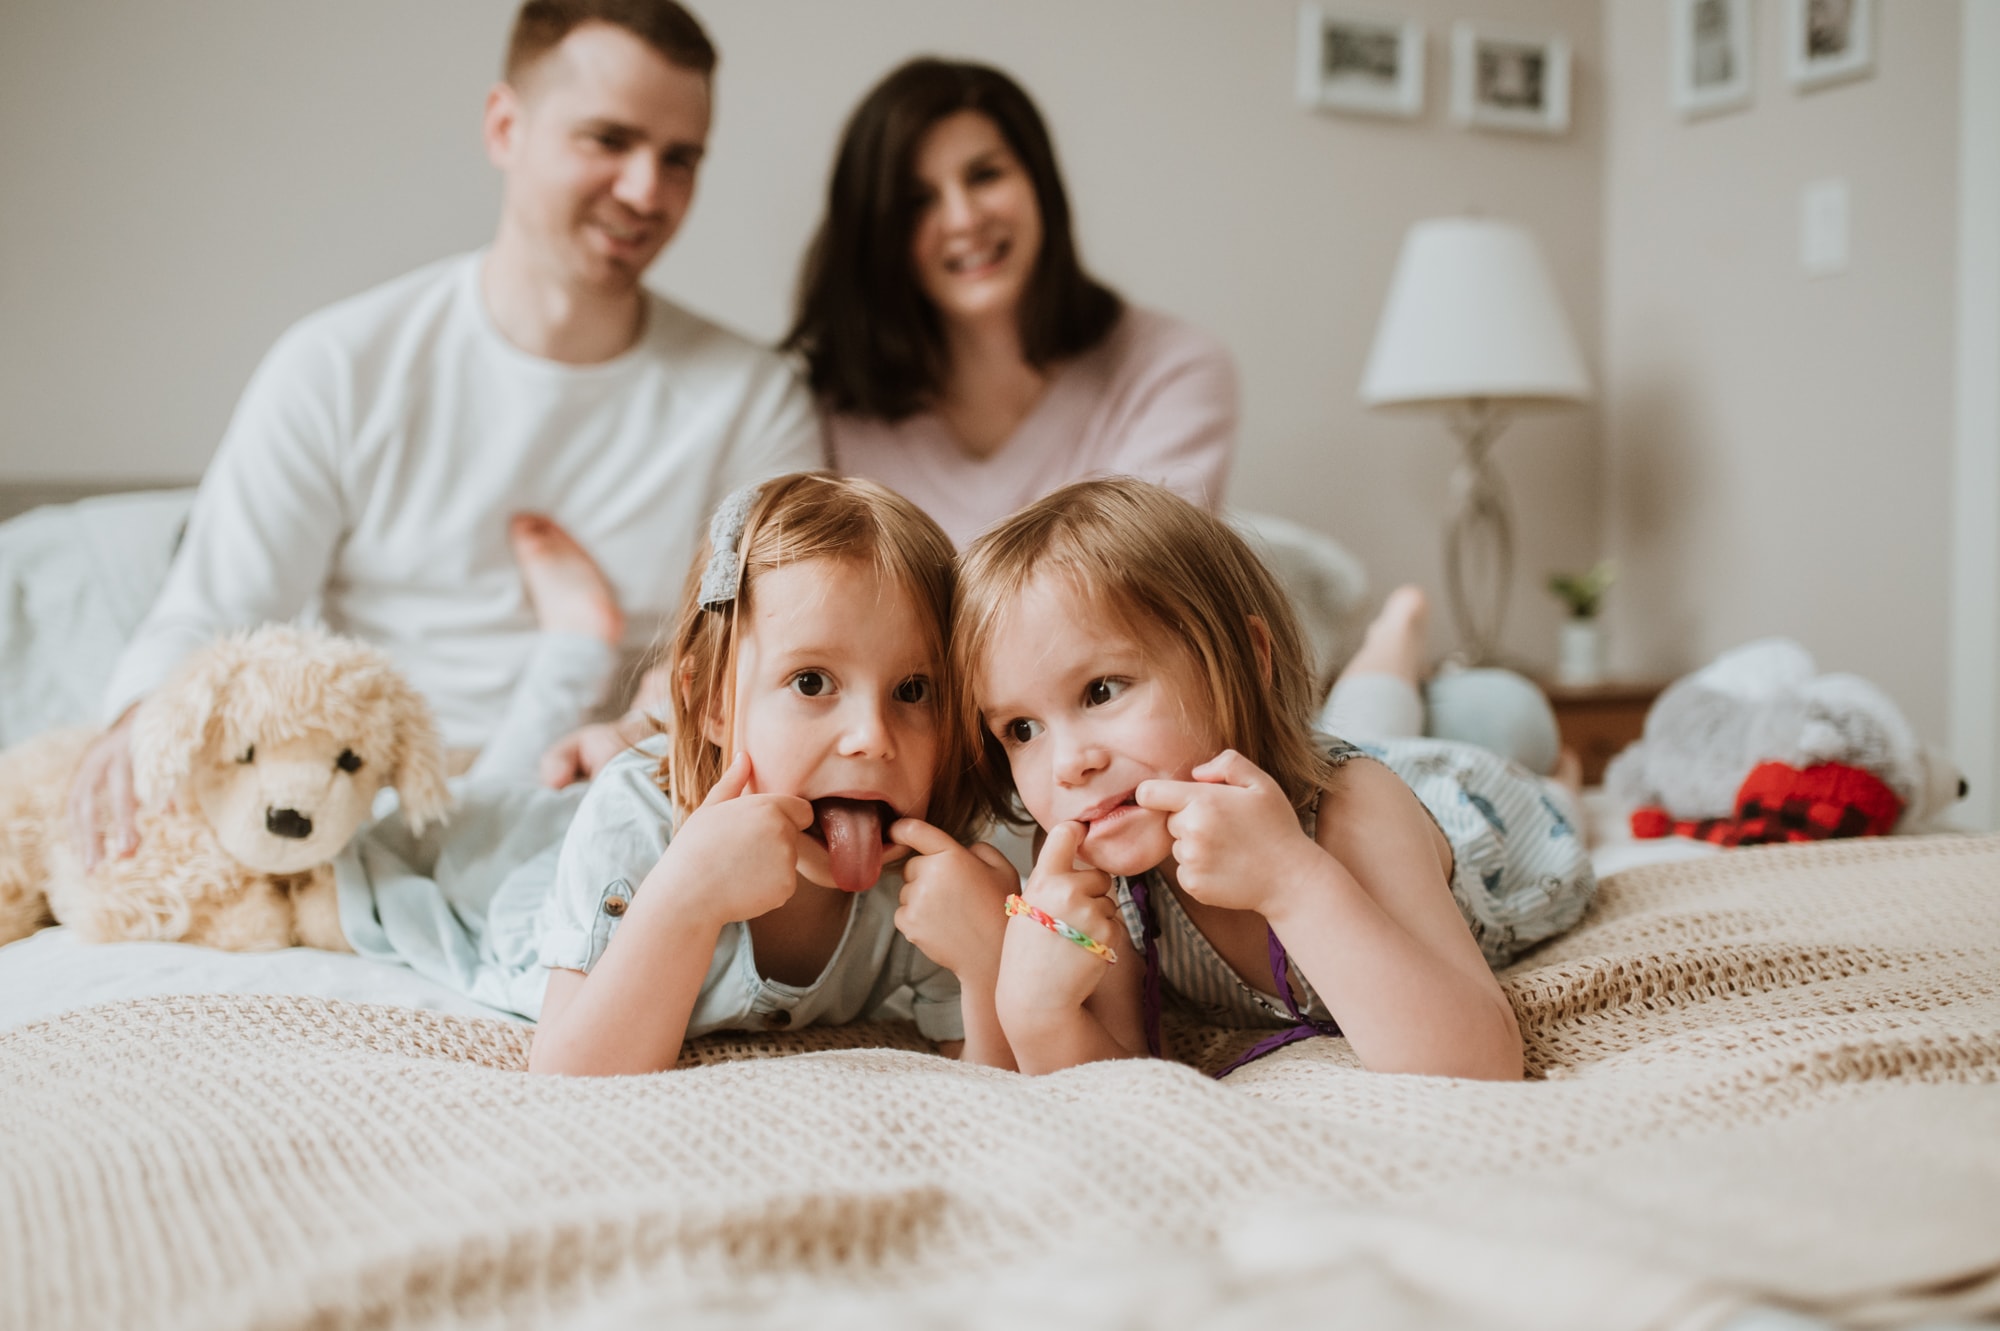 Twin girls pulling funny faces while lying on bed with parents looking on amused.